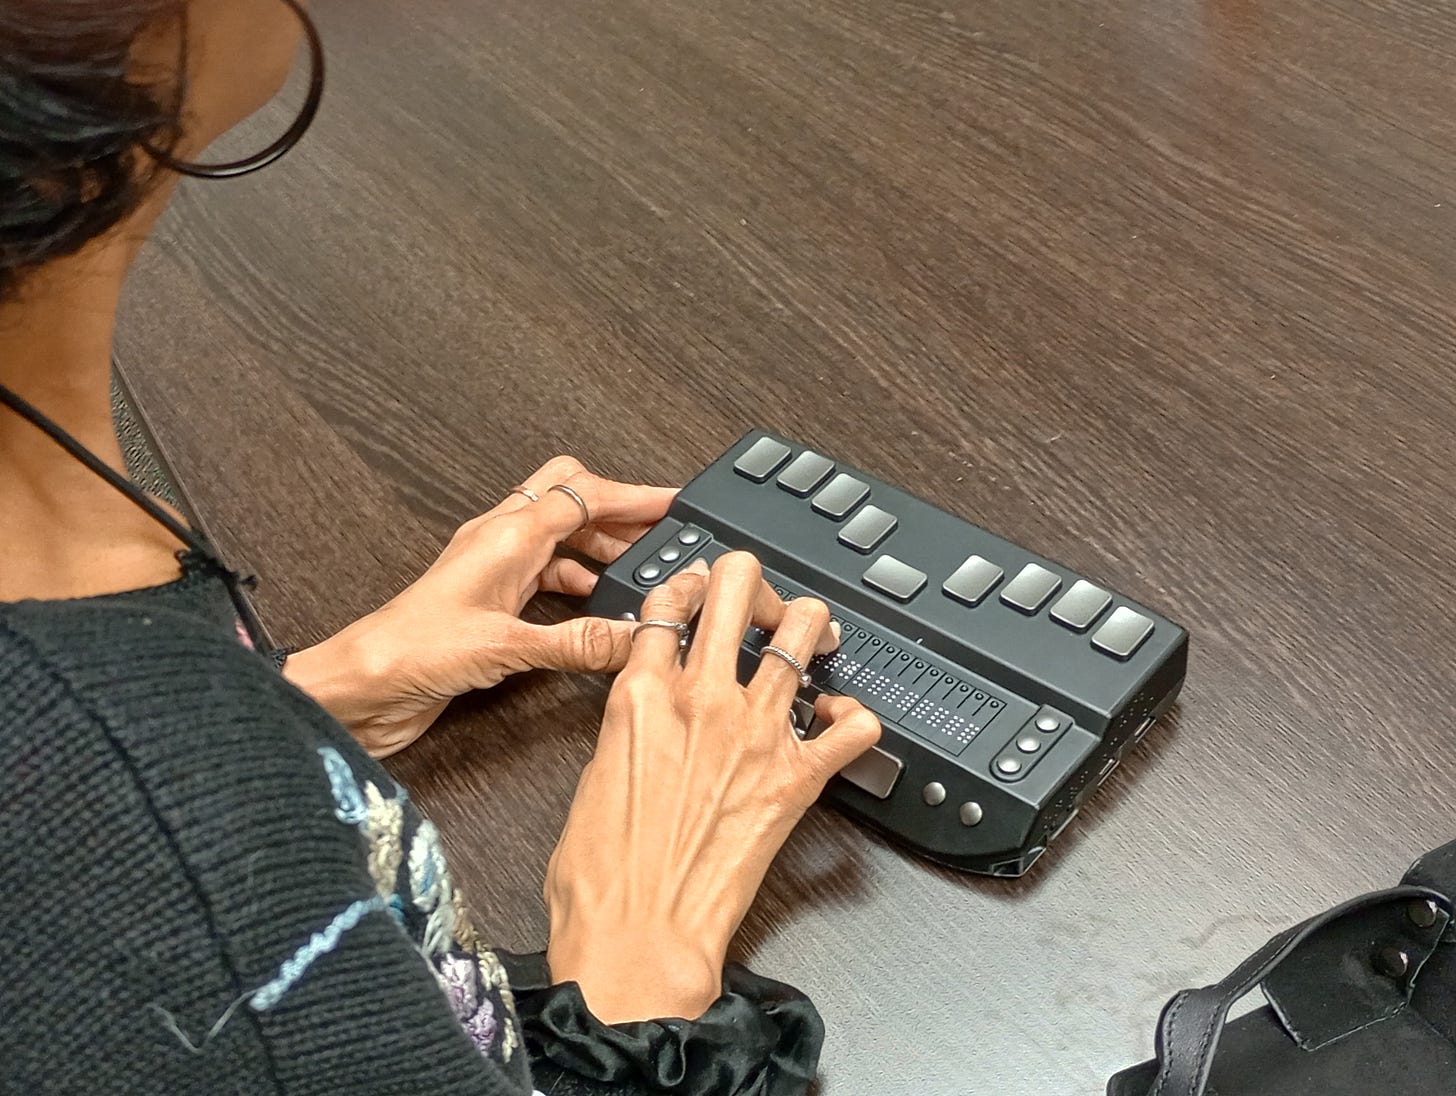 A woman using a Braille eReader - A closeup of a person's hands using a Braille eReader, a small portable electronic reading device for braille users.